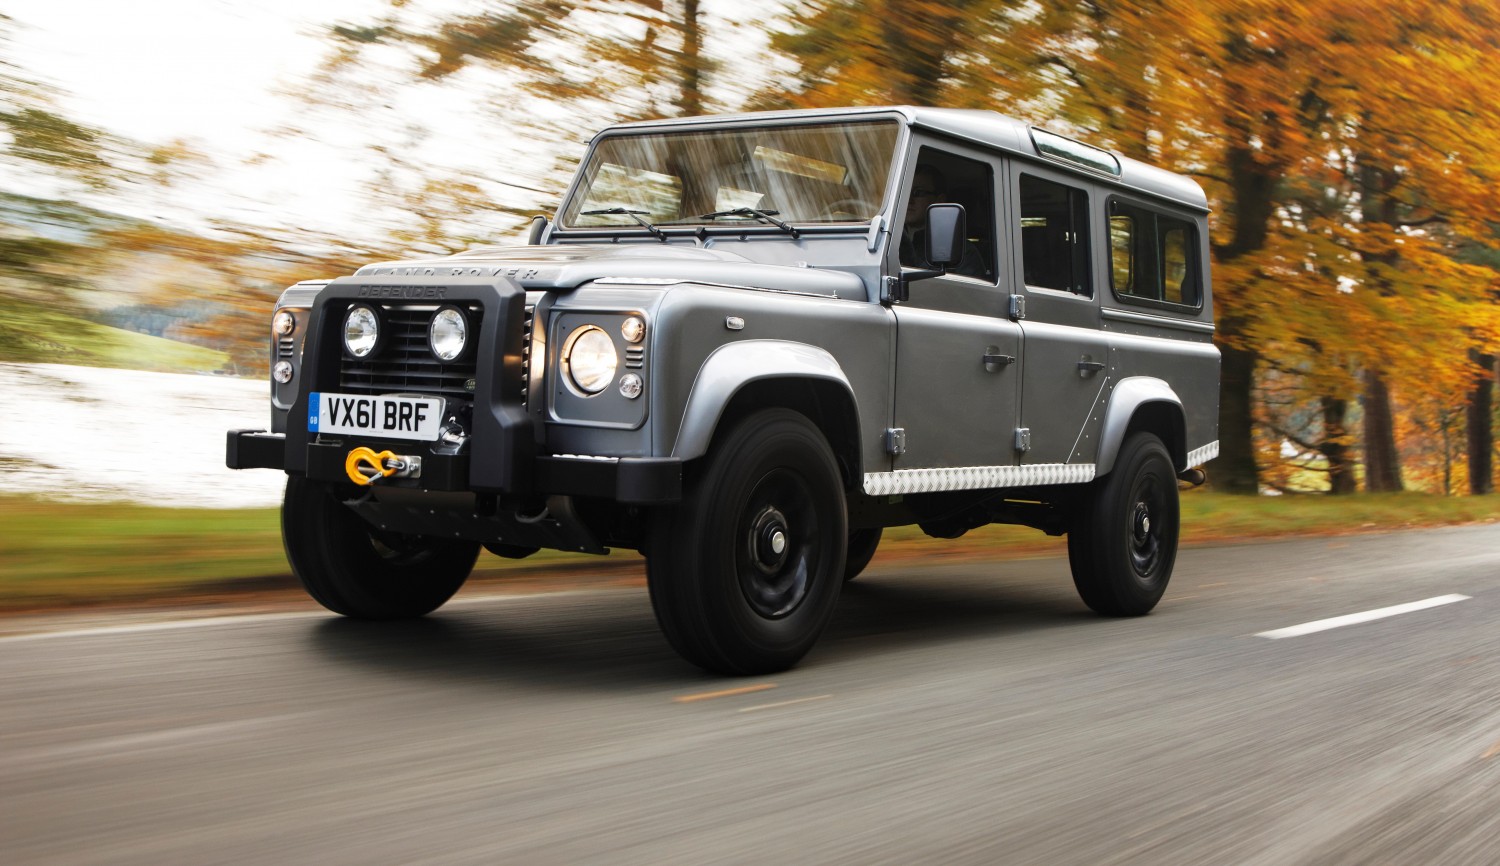 ervaring schotel palm Buying Used: The Ultimate Land Rover Defender Buyer's Guide - Loaded 4X4